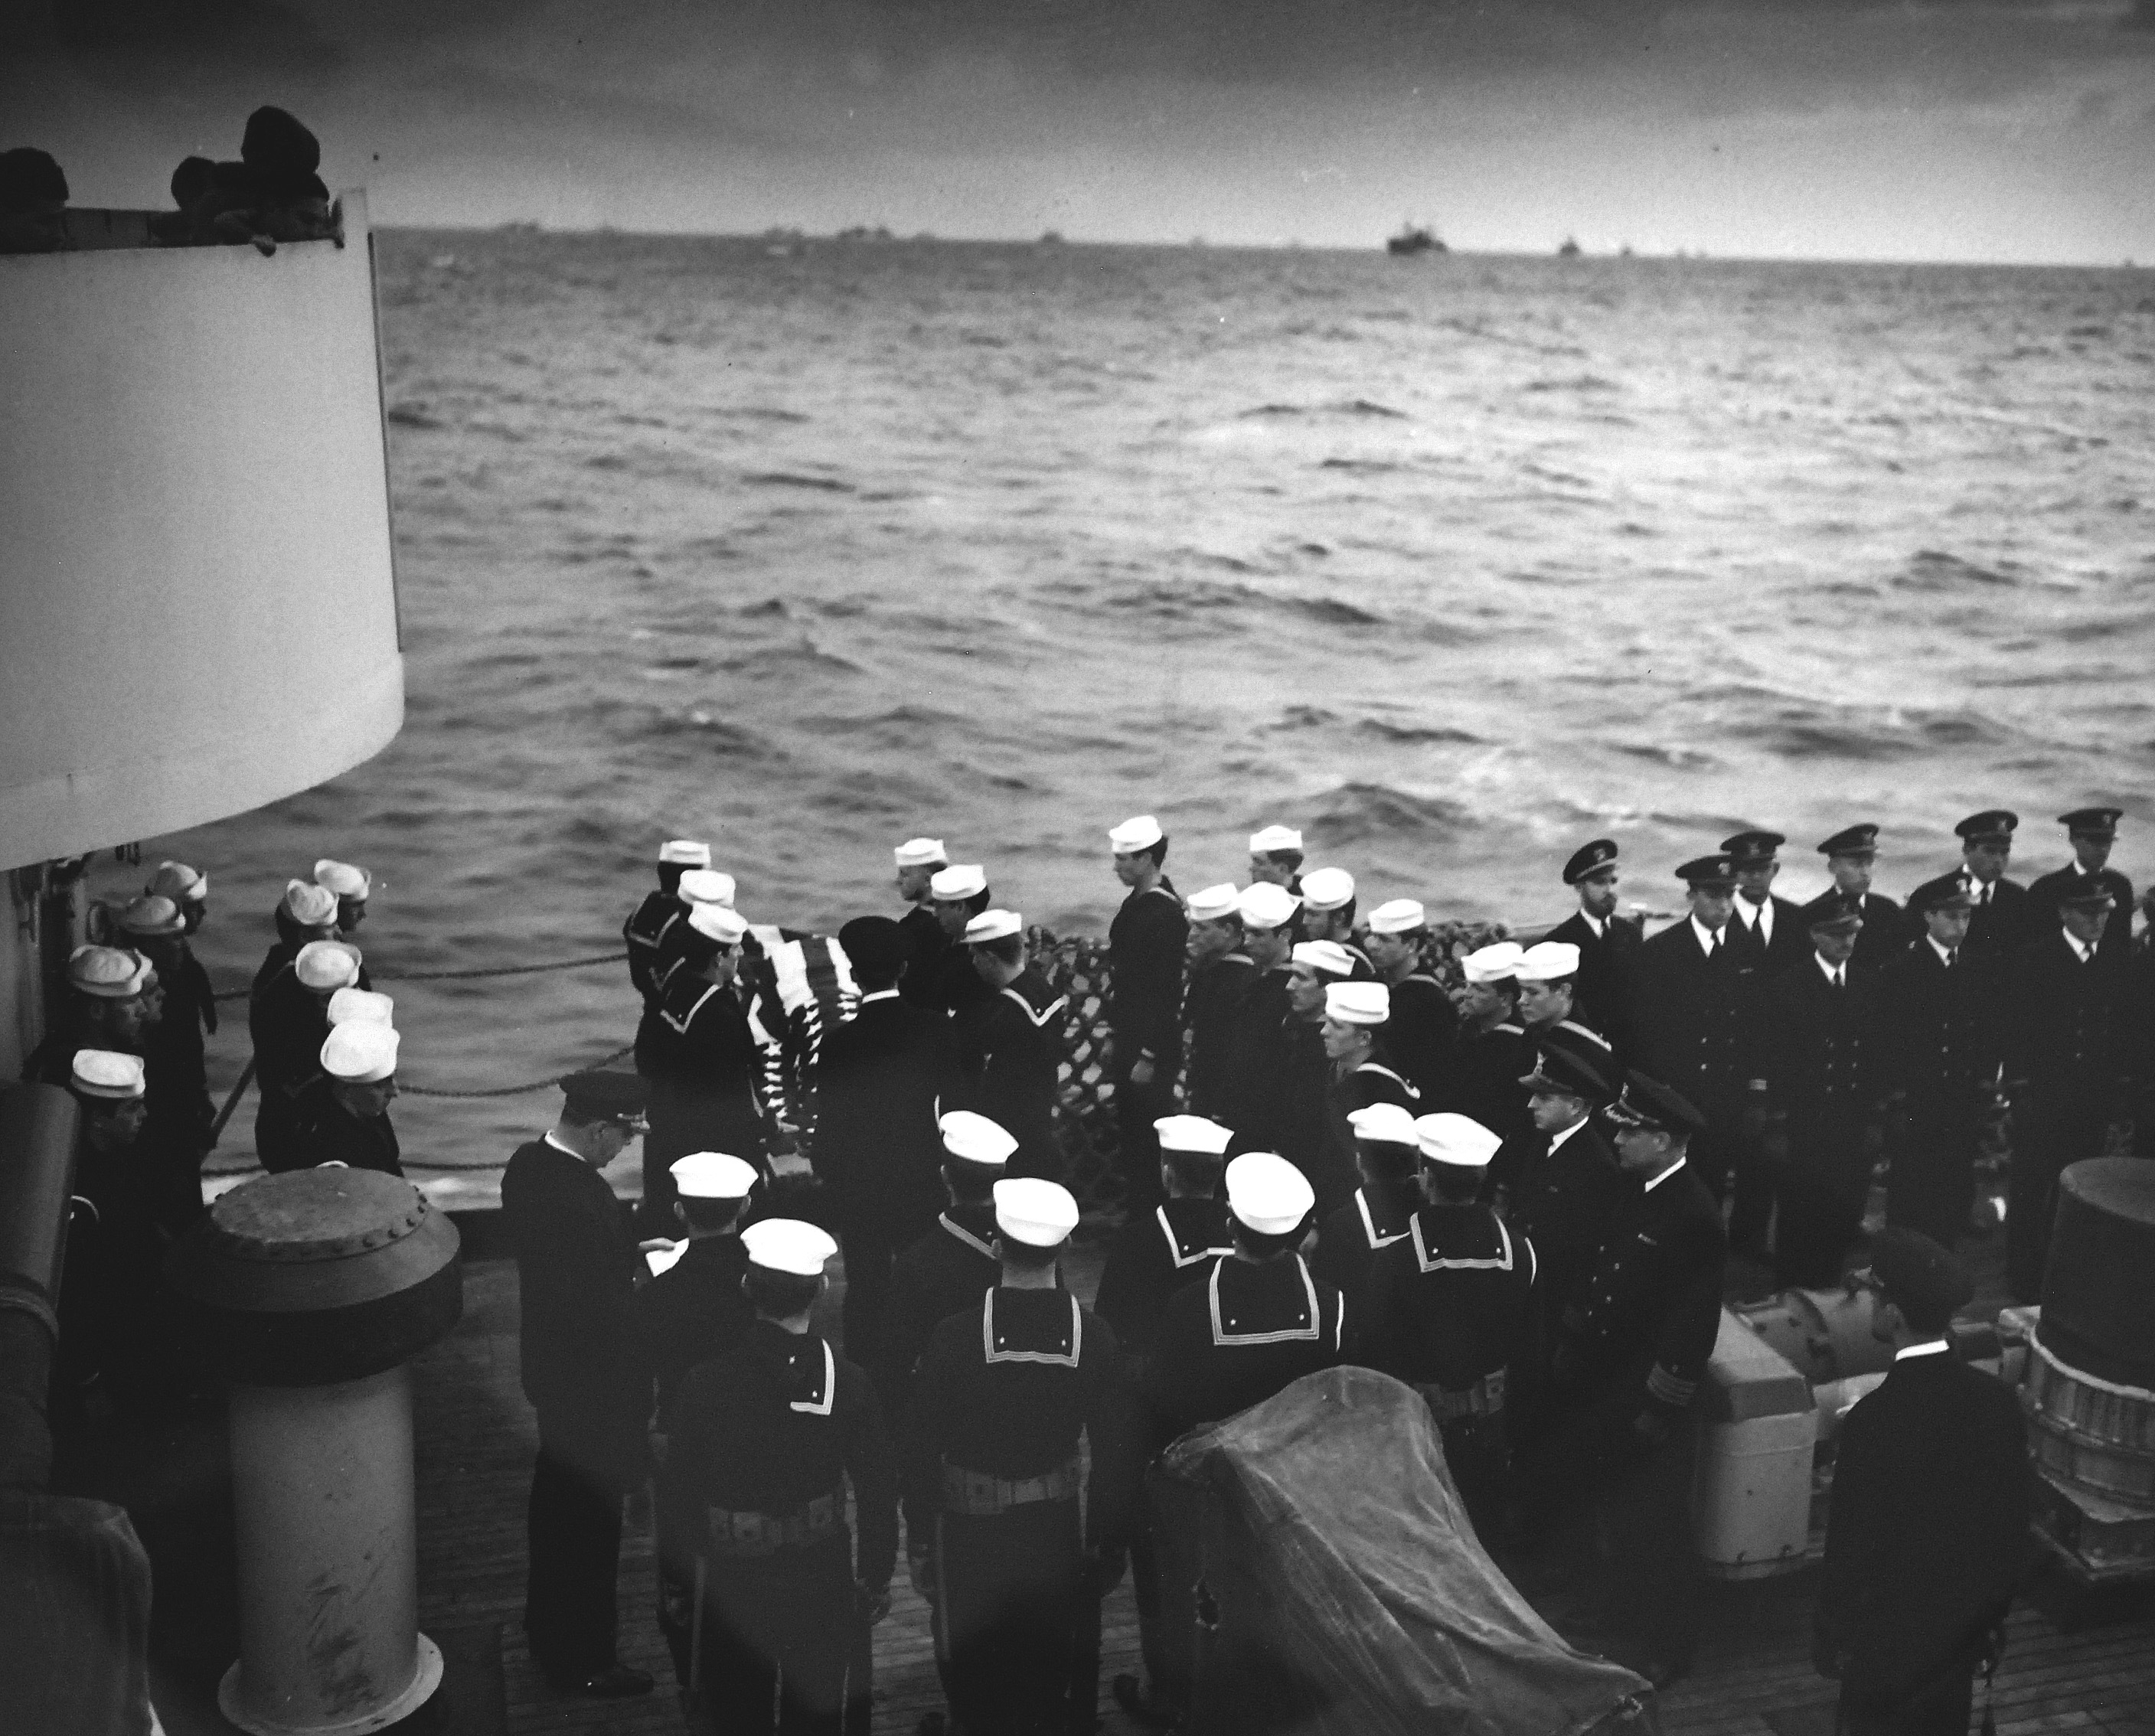 Funeral services aboard United States Coast Guard cutter Spencer 18 Apr 1943 for sailor killed in action against U-175 the day before in the North Atlantic.